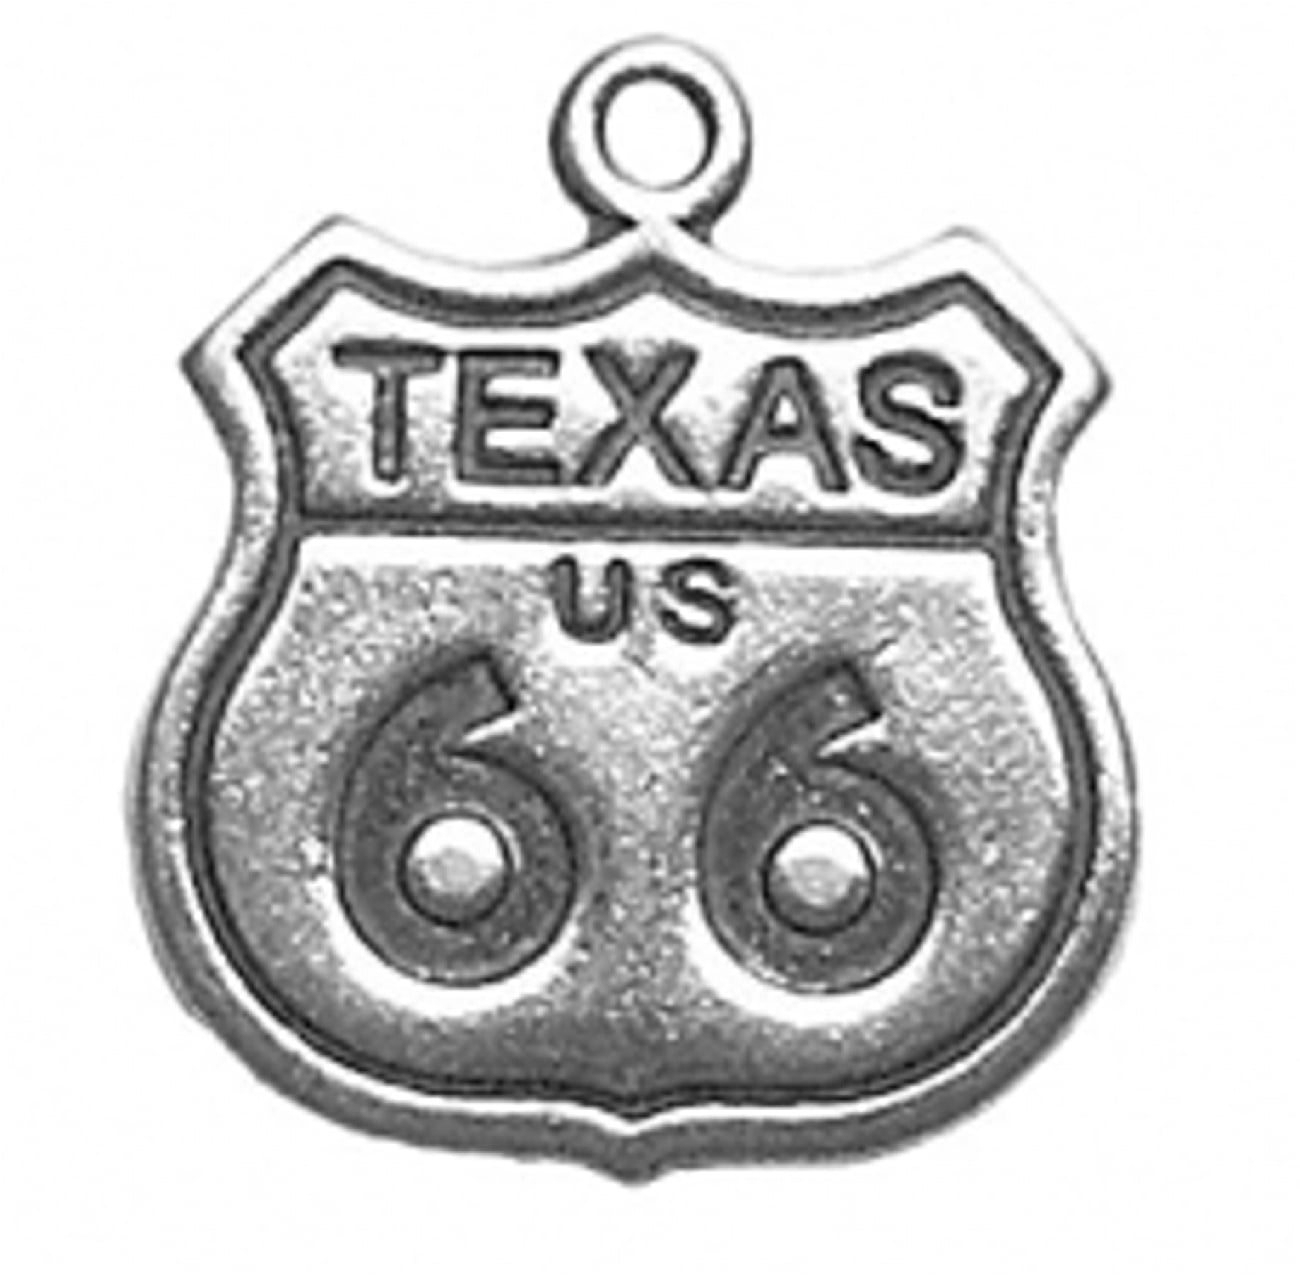 Sterling Silver Girls .8mm Box Chain TEXAS State Pendant Necklace